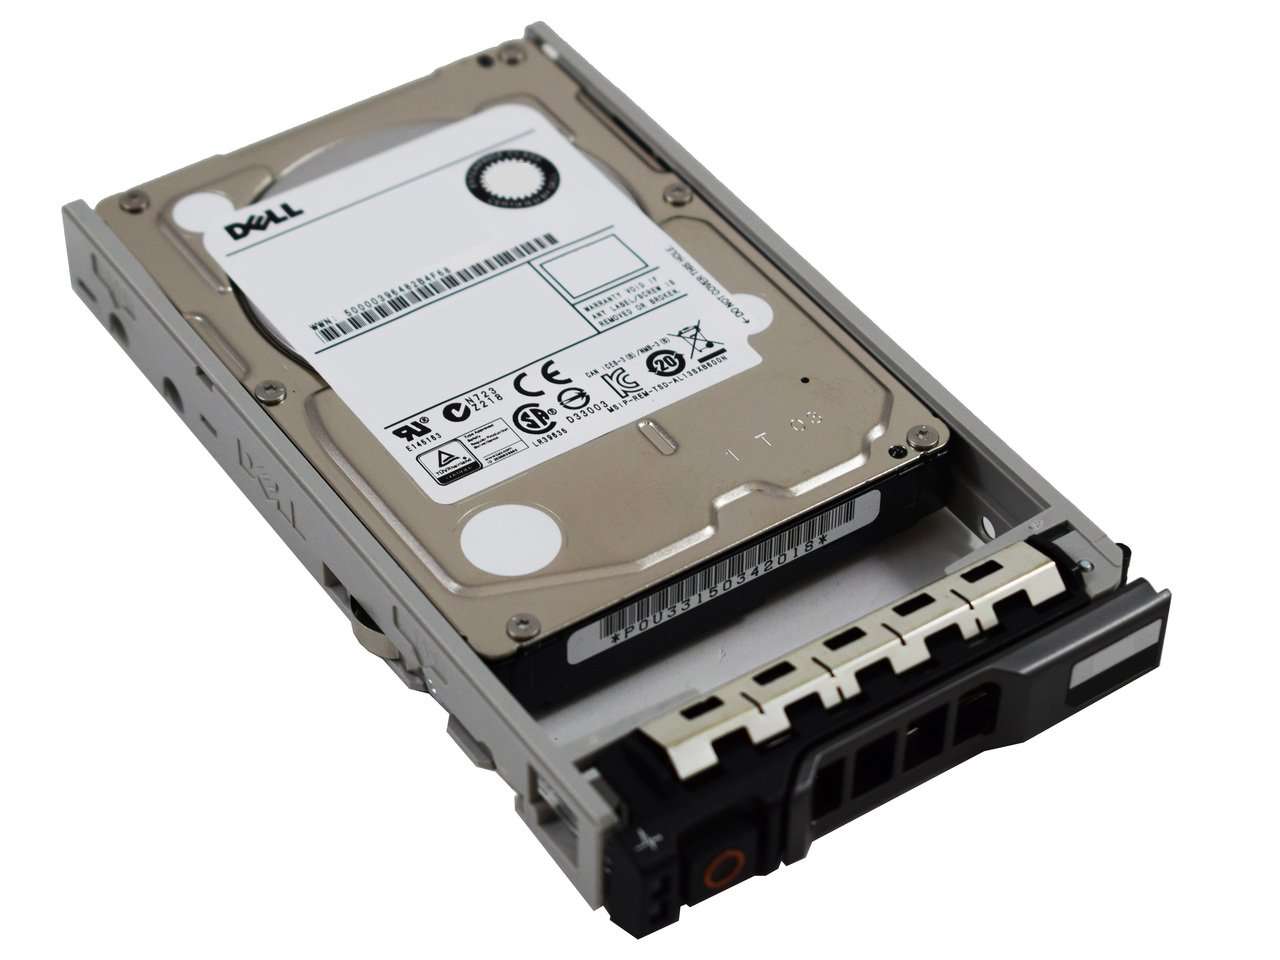 Dell G13 400-AGII 600GB 15K RPM SAS 6Gb/s 512n 2.5" Manufacturer Recertified HDD